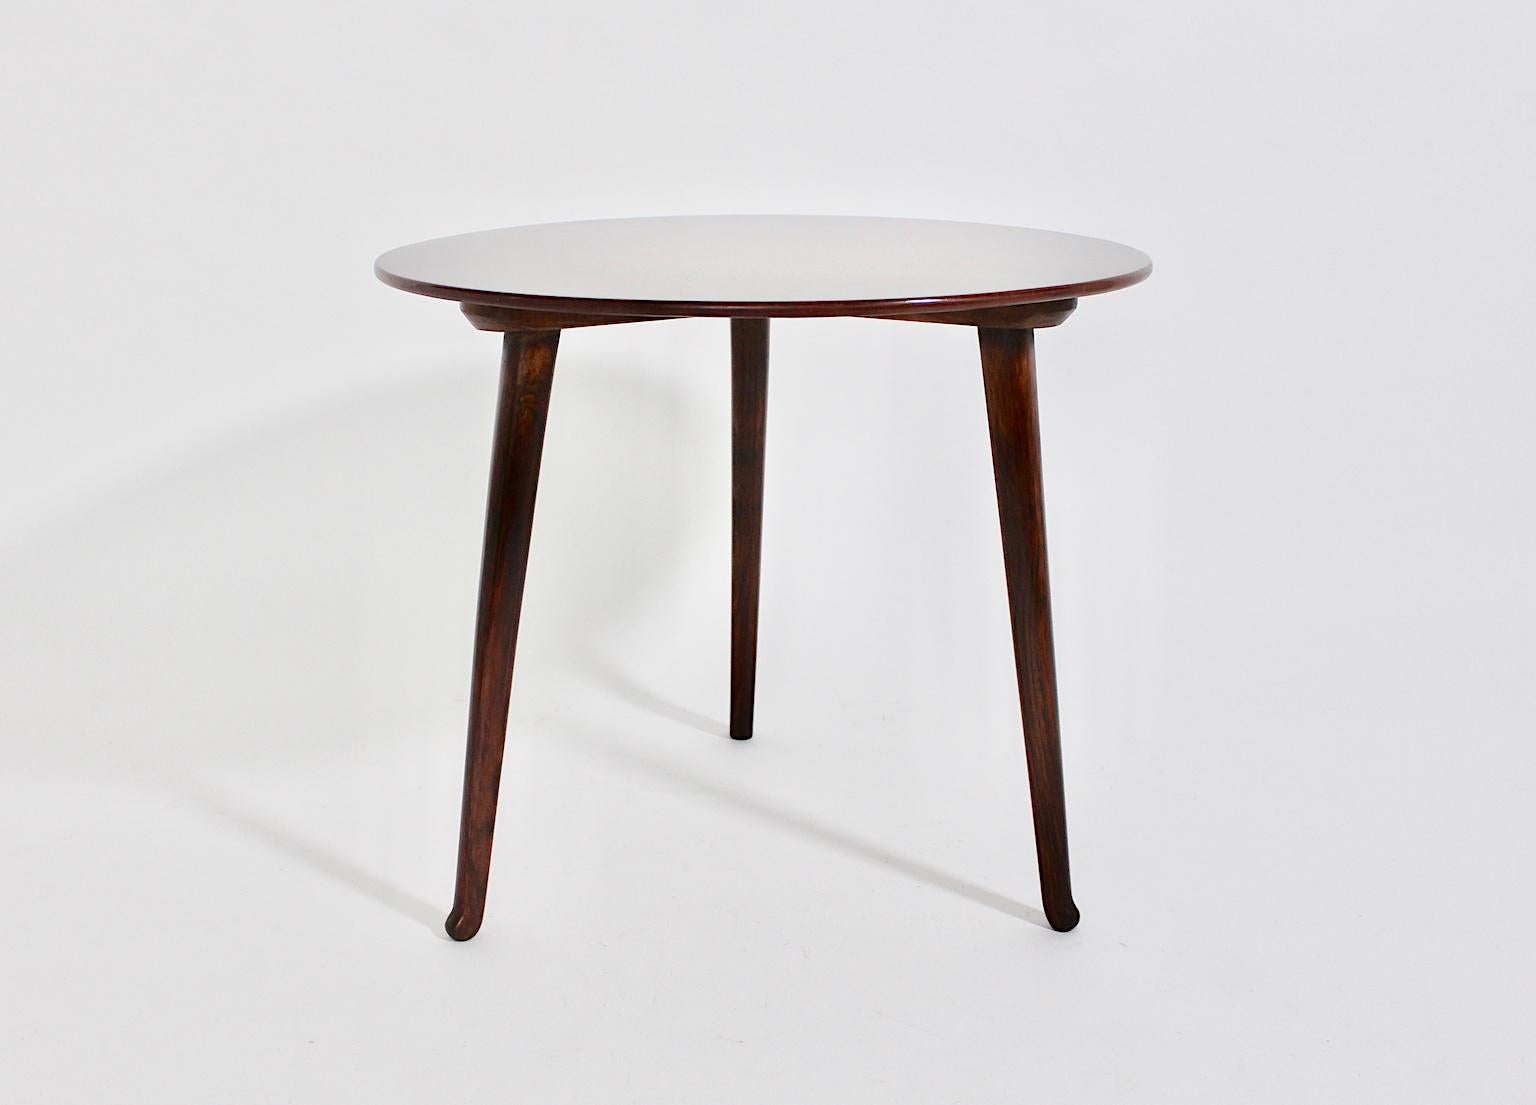 Early 20th Century Art Deco Vintage Walnut Side Table by Josef Frank Haus and Garten Vienna c 1925 For Sale